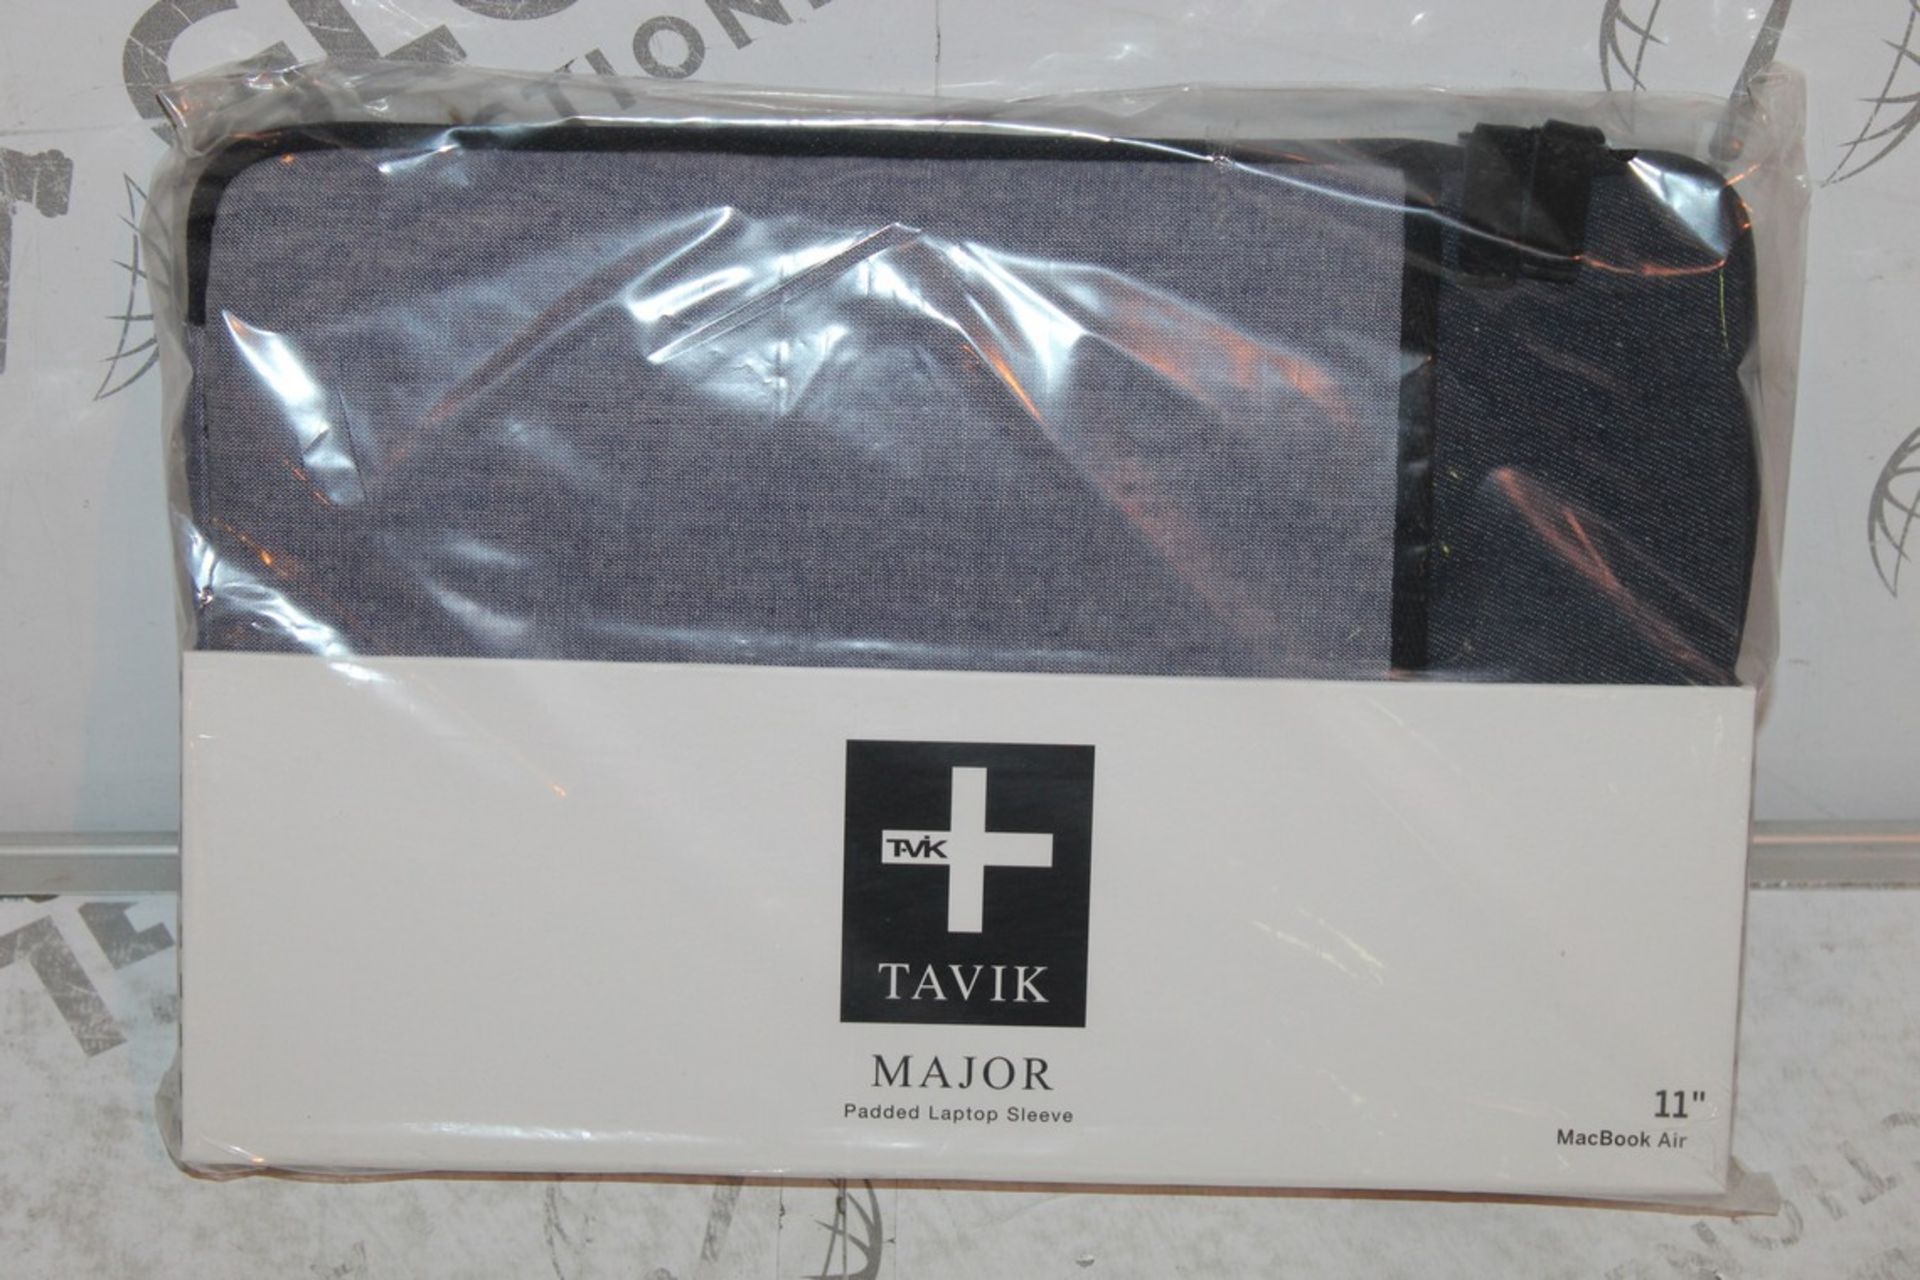 Lot to Contain 5 Brand New Tavik Major 11Inch Macbook Air Padded Laptop Sleeves Combined RRP £100